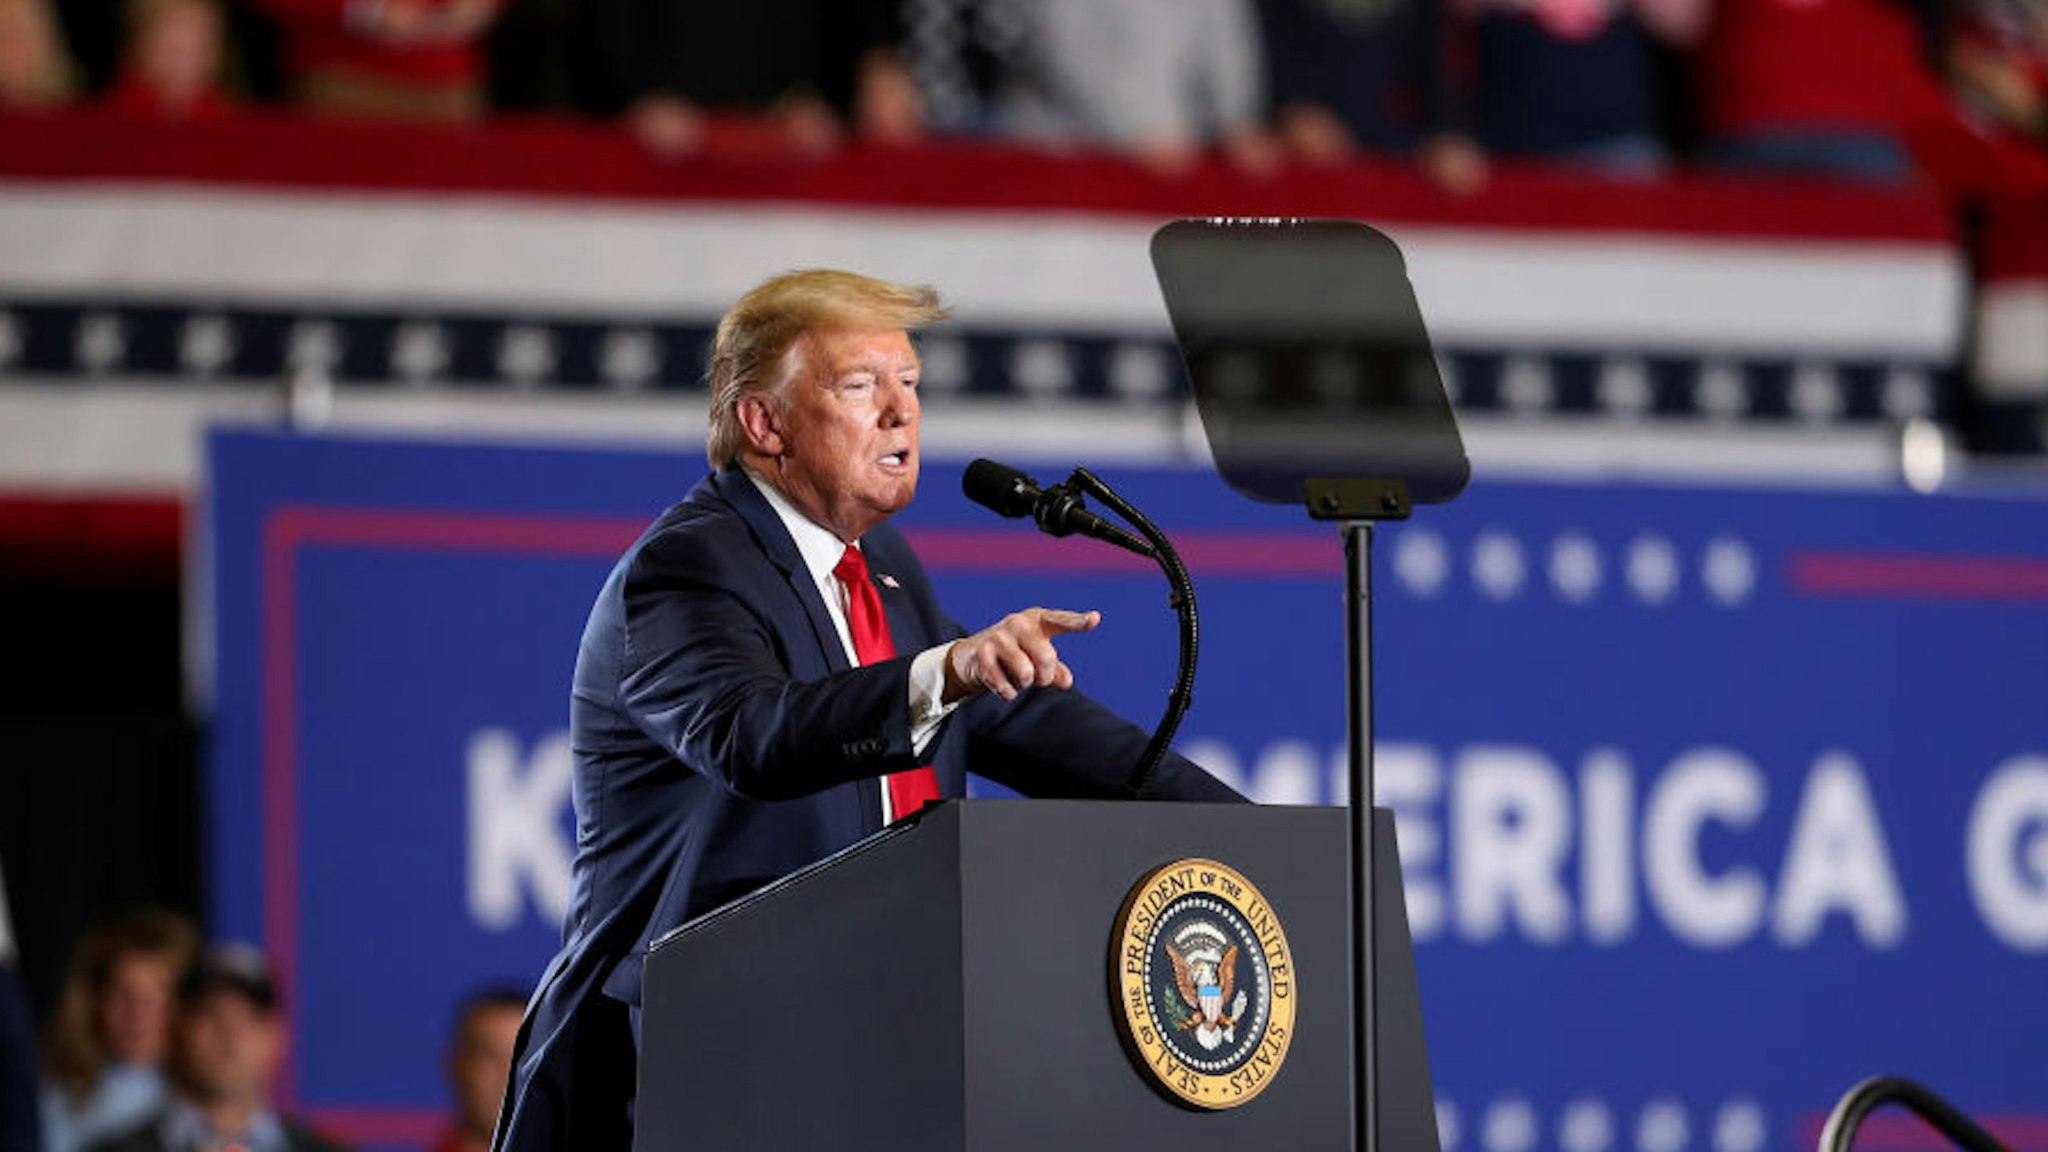 NEW JERSEY, USA - JANUARY 28: U.S. President Donald Trump addresses during 'Keep America Great Rally' at the Wildwood Convention Center on January 28, 2020 in Wildwood, New Jersey, United States.